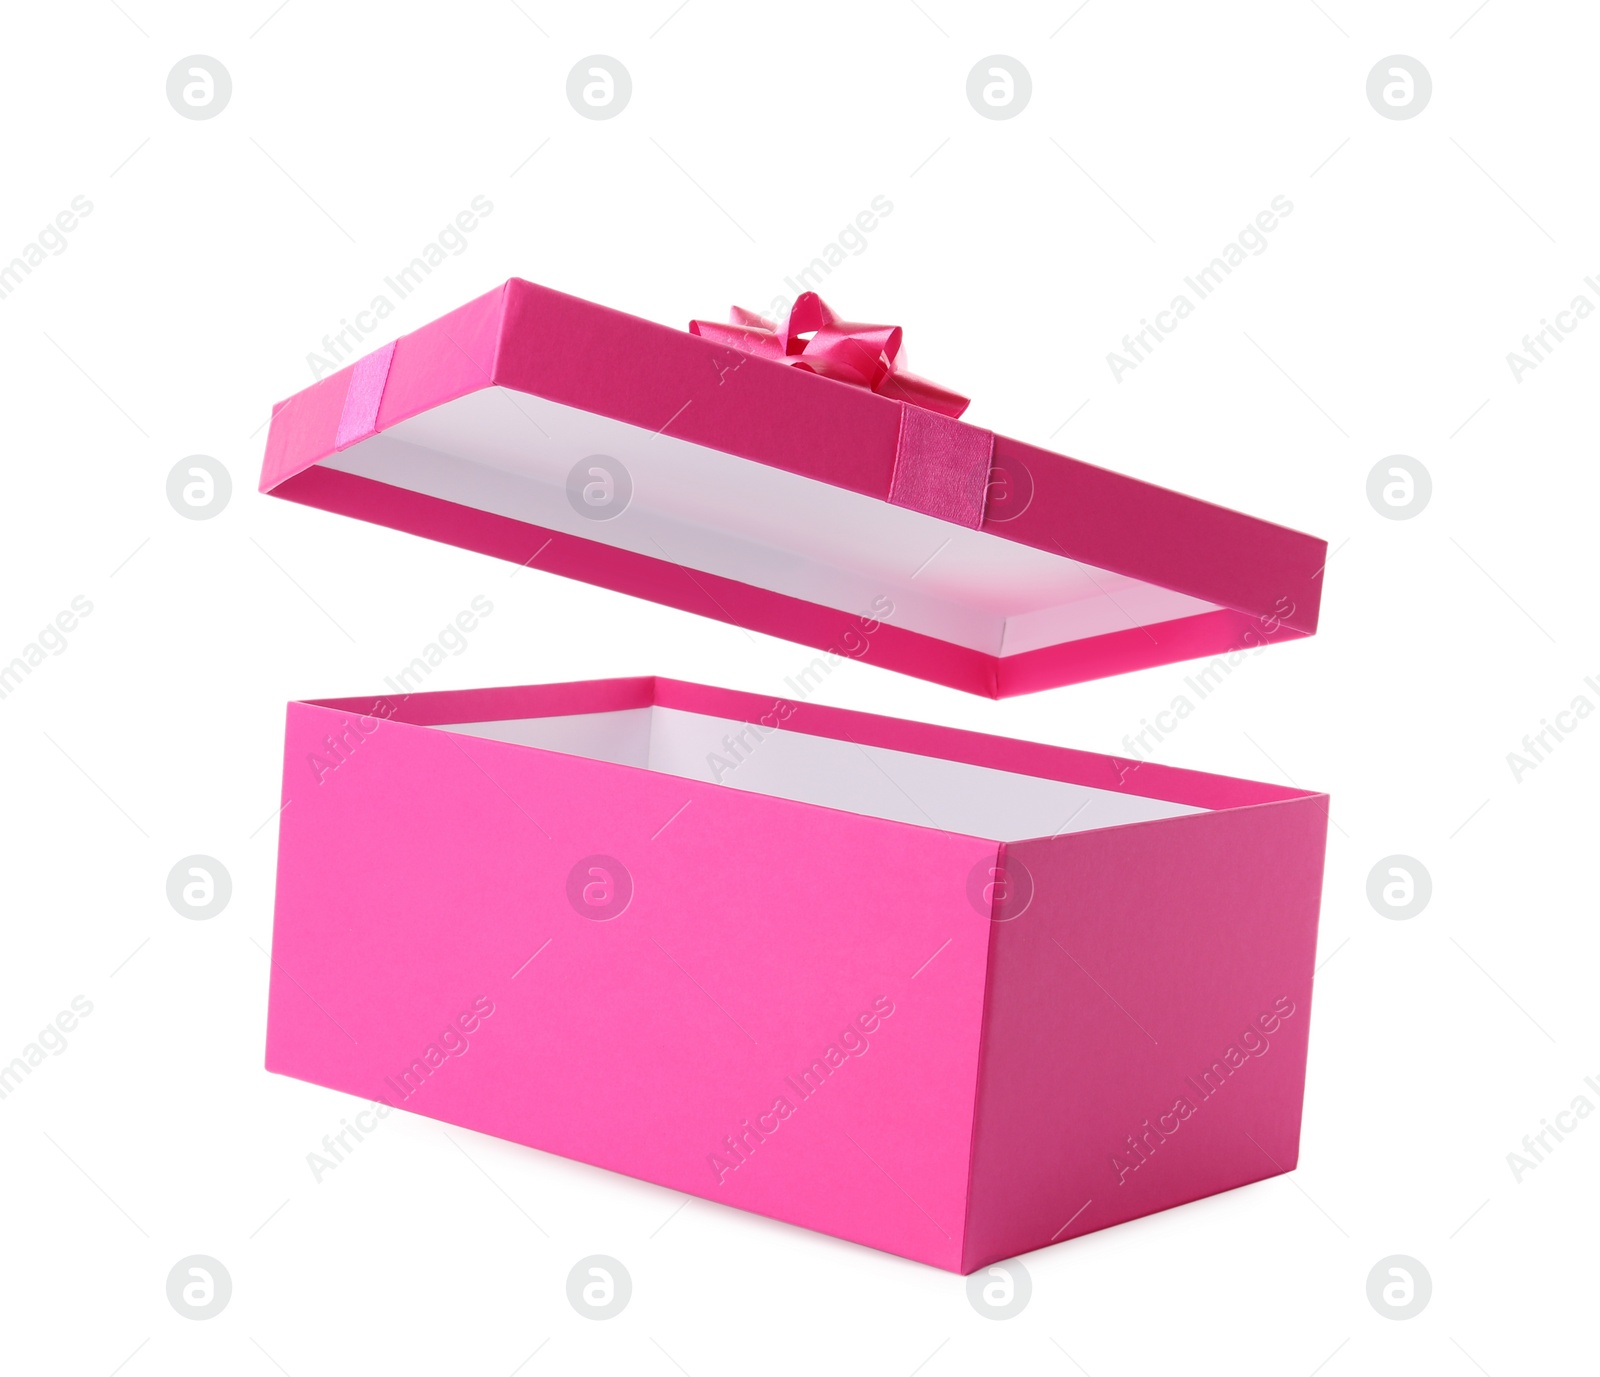 Photo of Pink gift box and lid with bow on white background